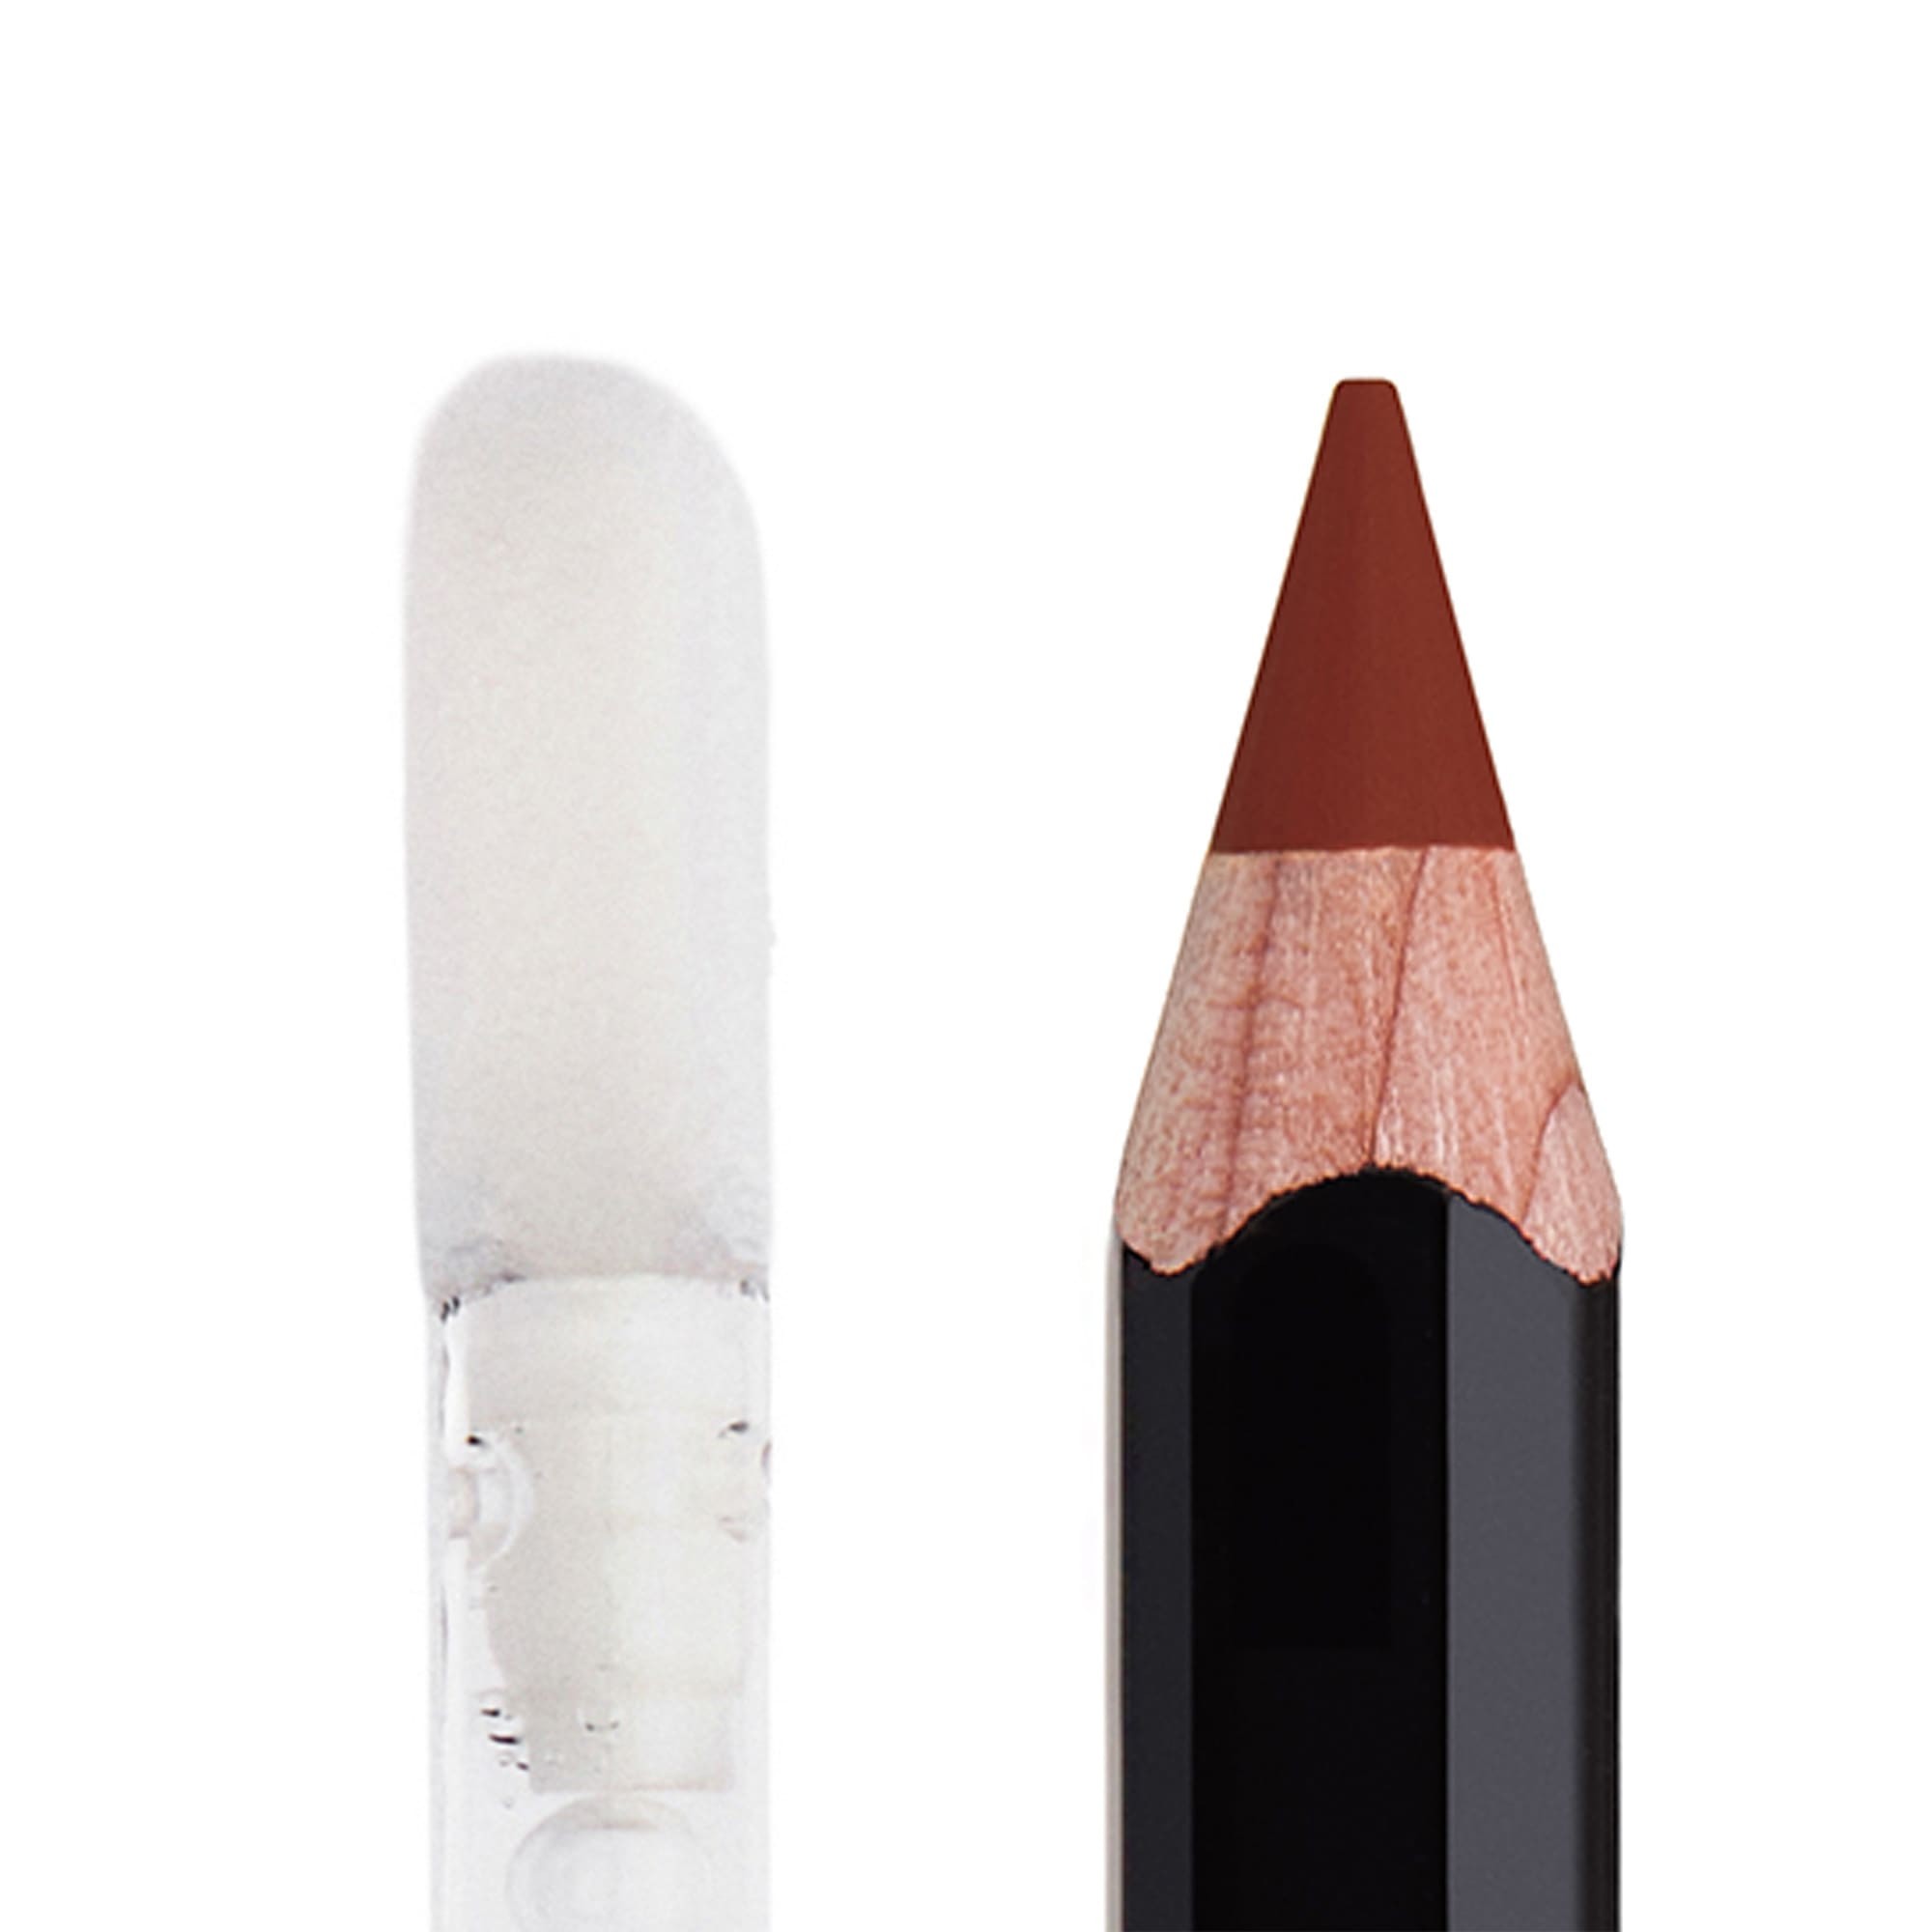 Anastasia Beverly Hills Pout Master Sculpted Lip Duo Malt